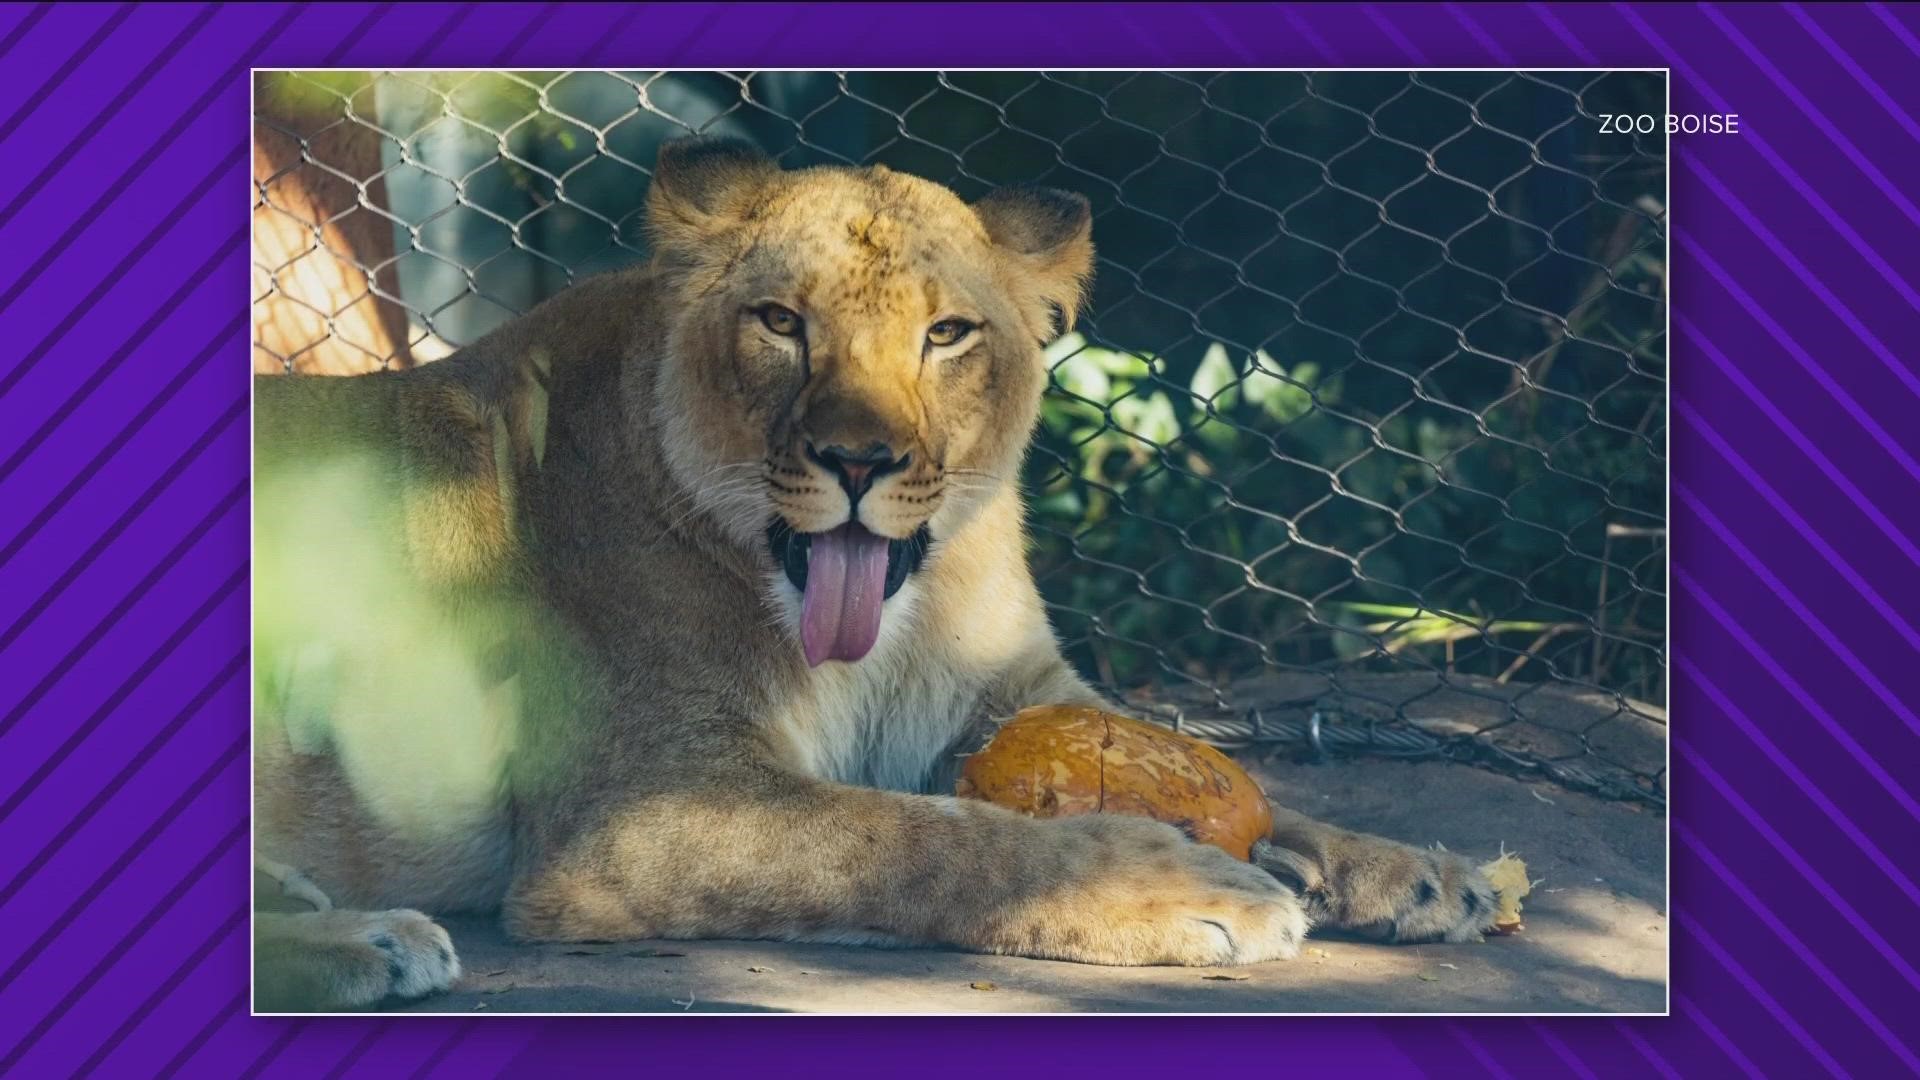 Zoo Boise just announced the upcoming arrival of a new female African lion in March, giving its lone male lion a companion after his former companion died last year.